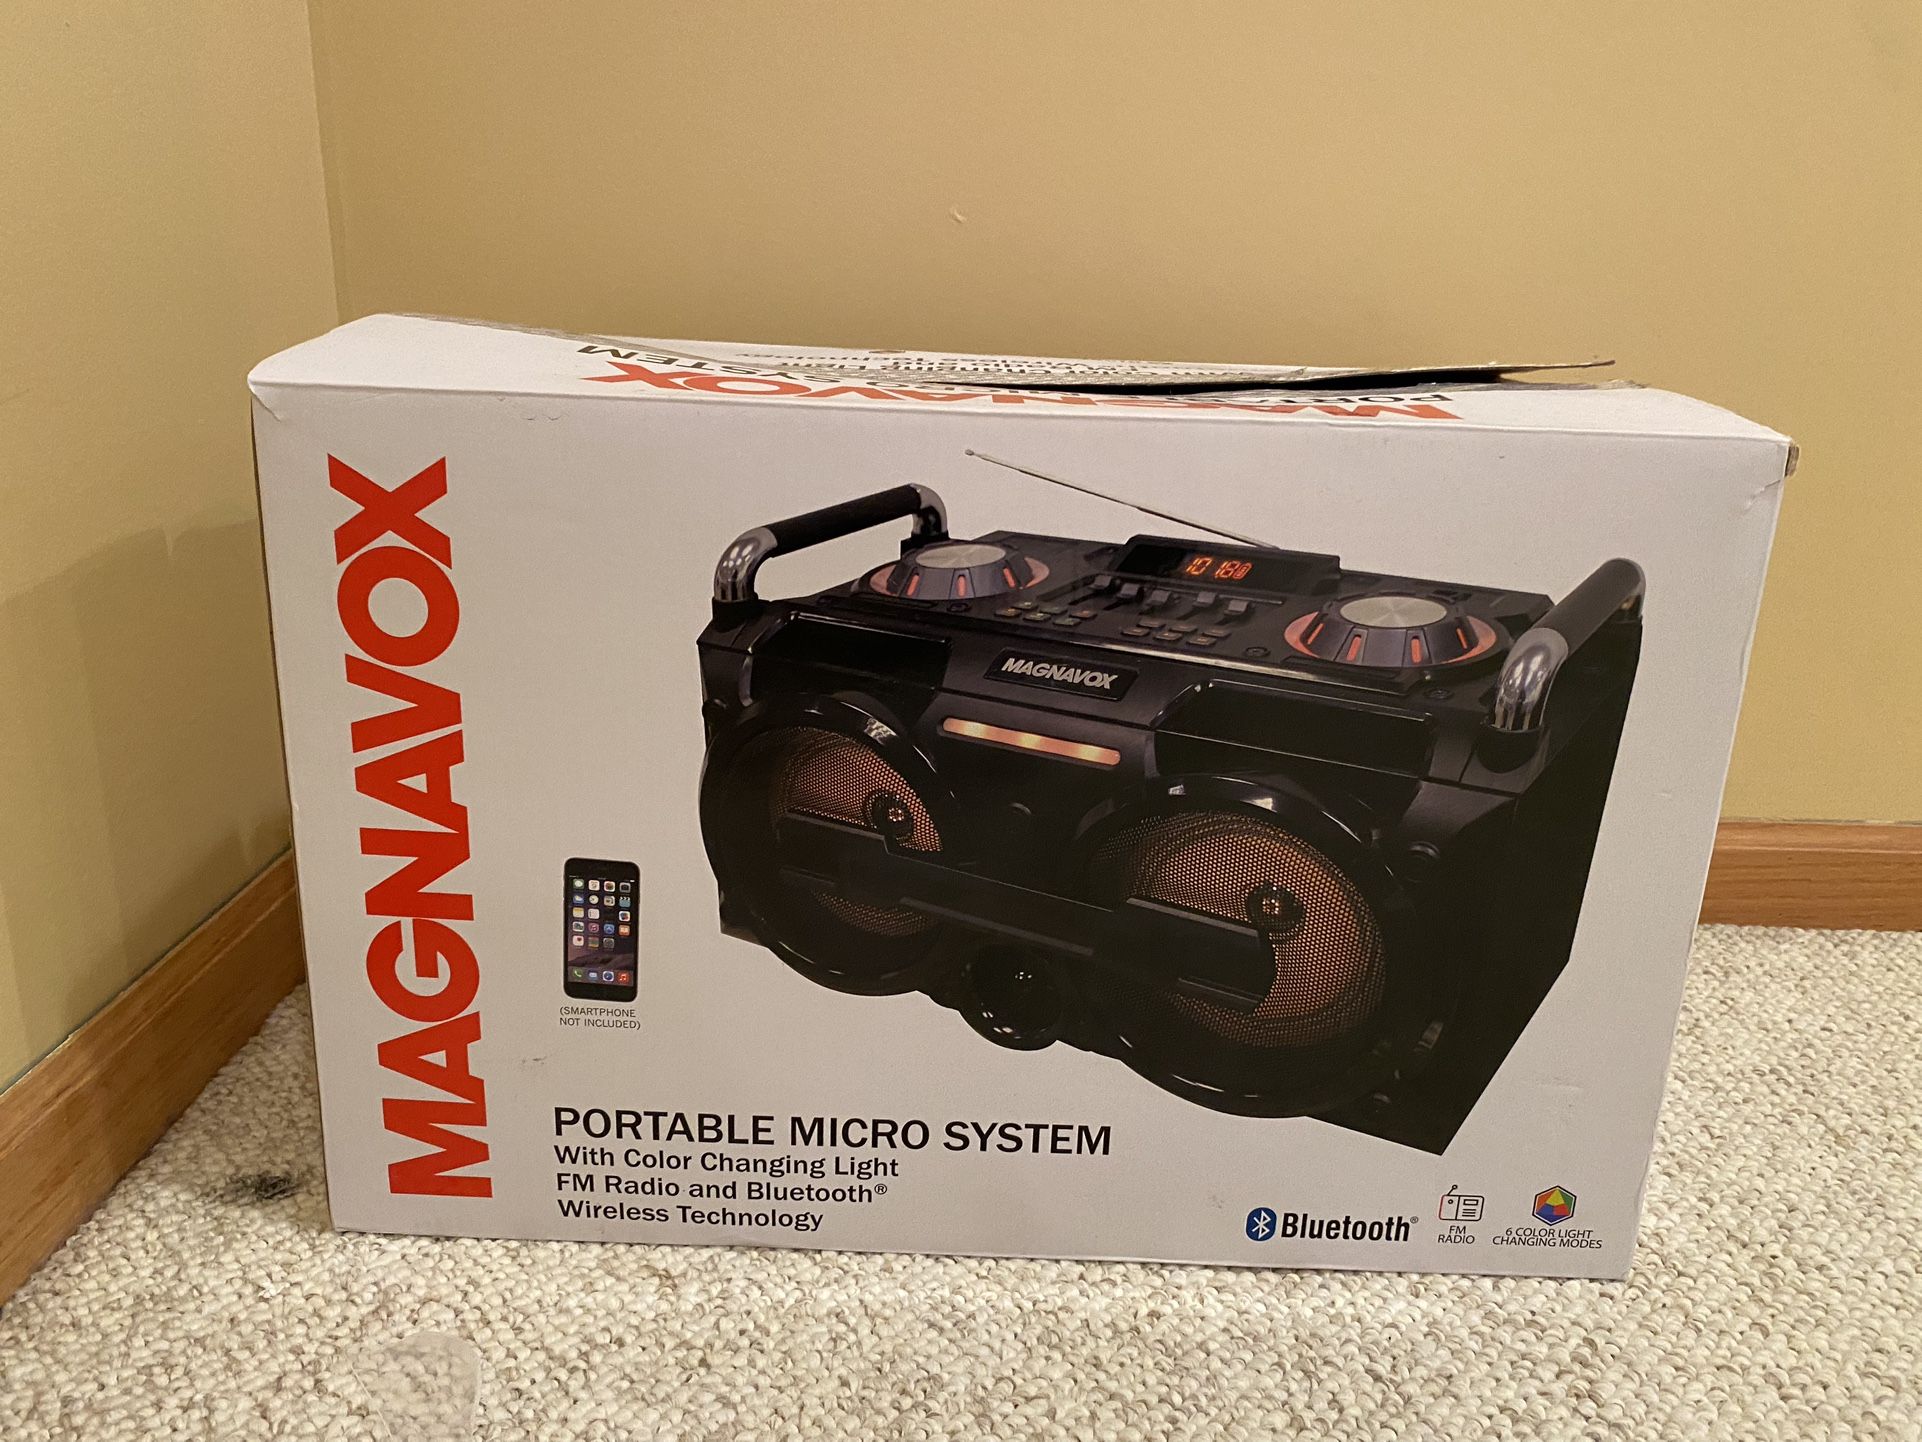 Magnavox Portable Micro System with Color Light